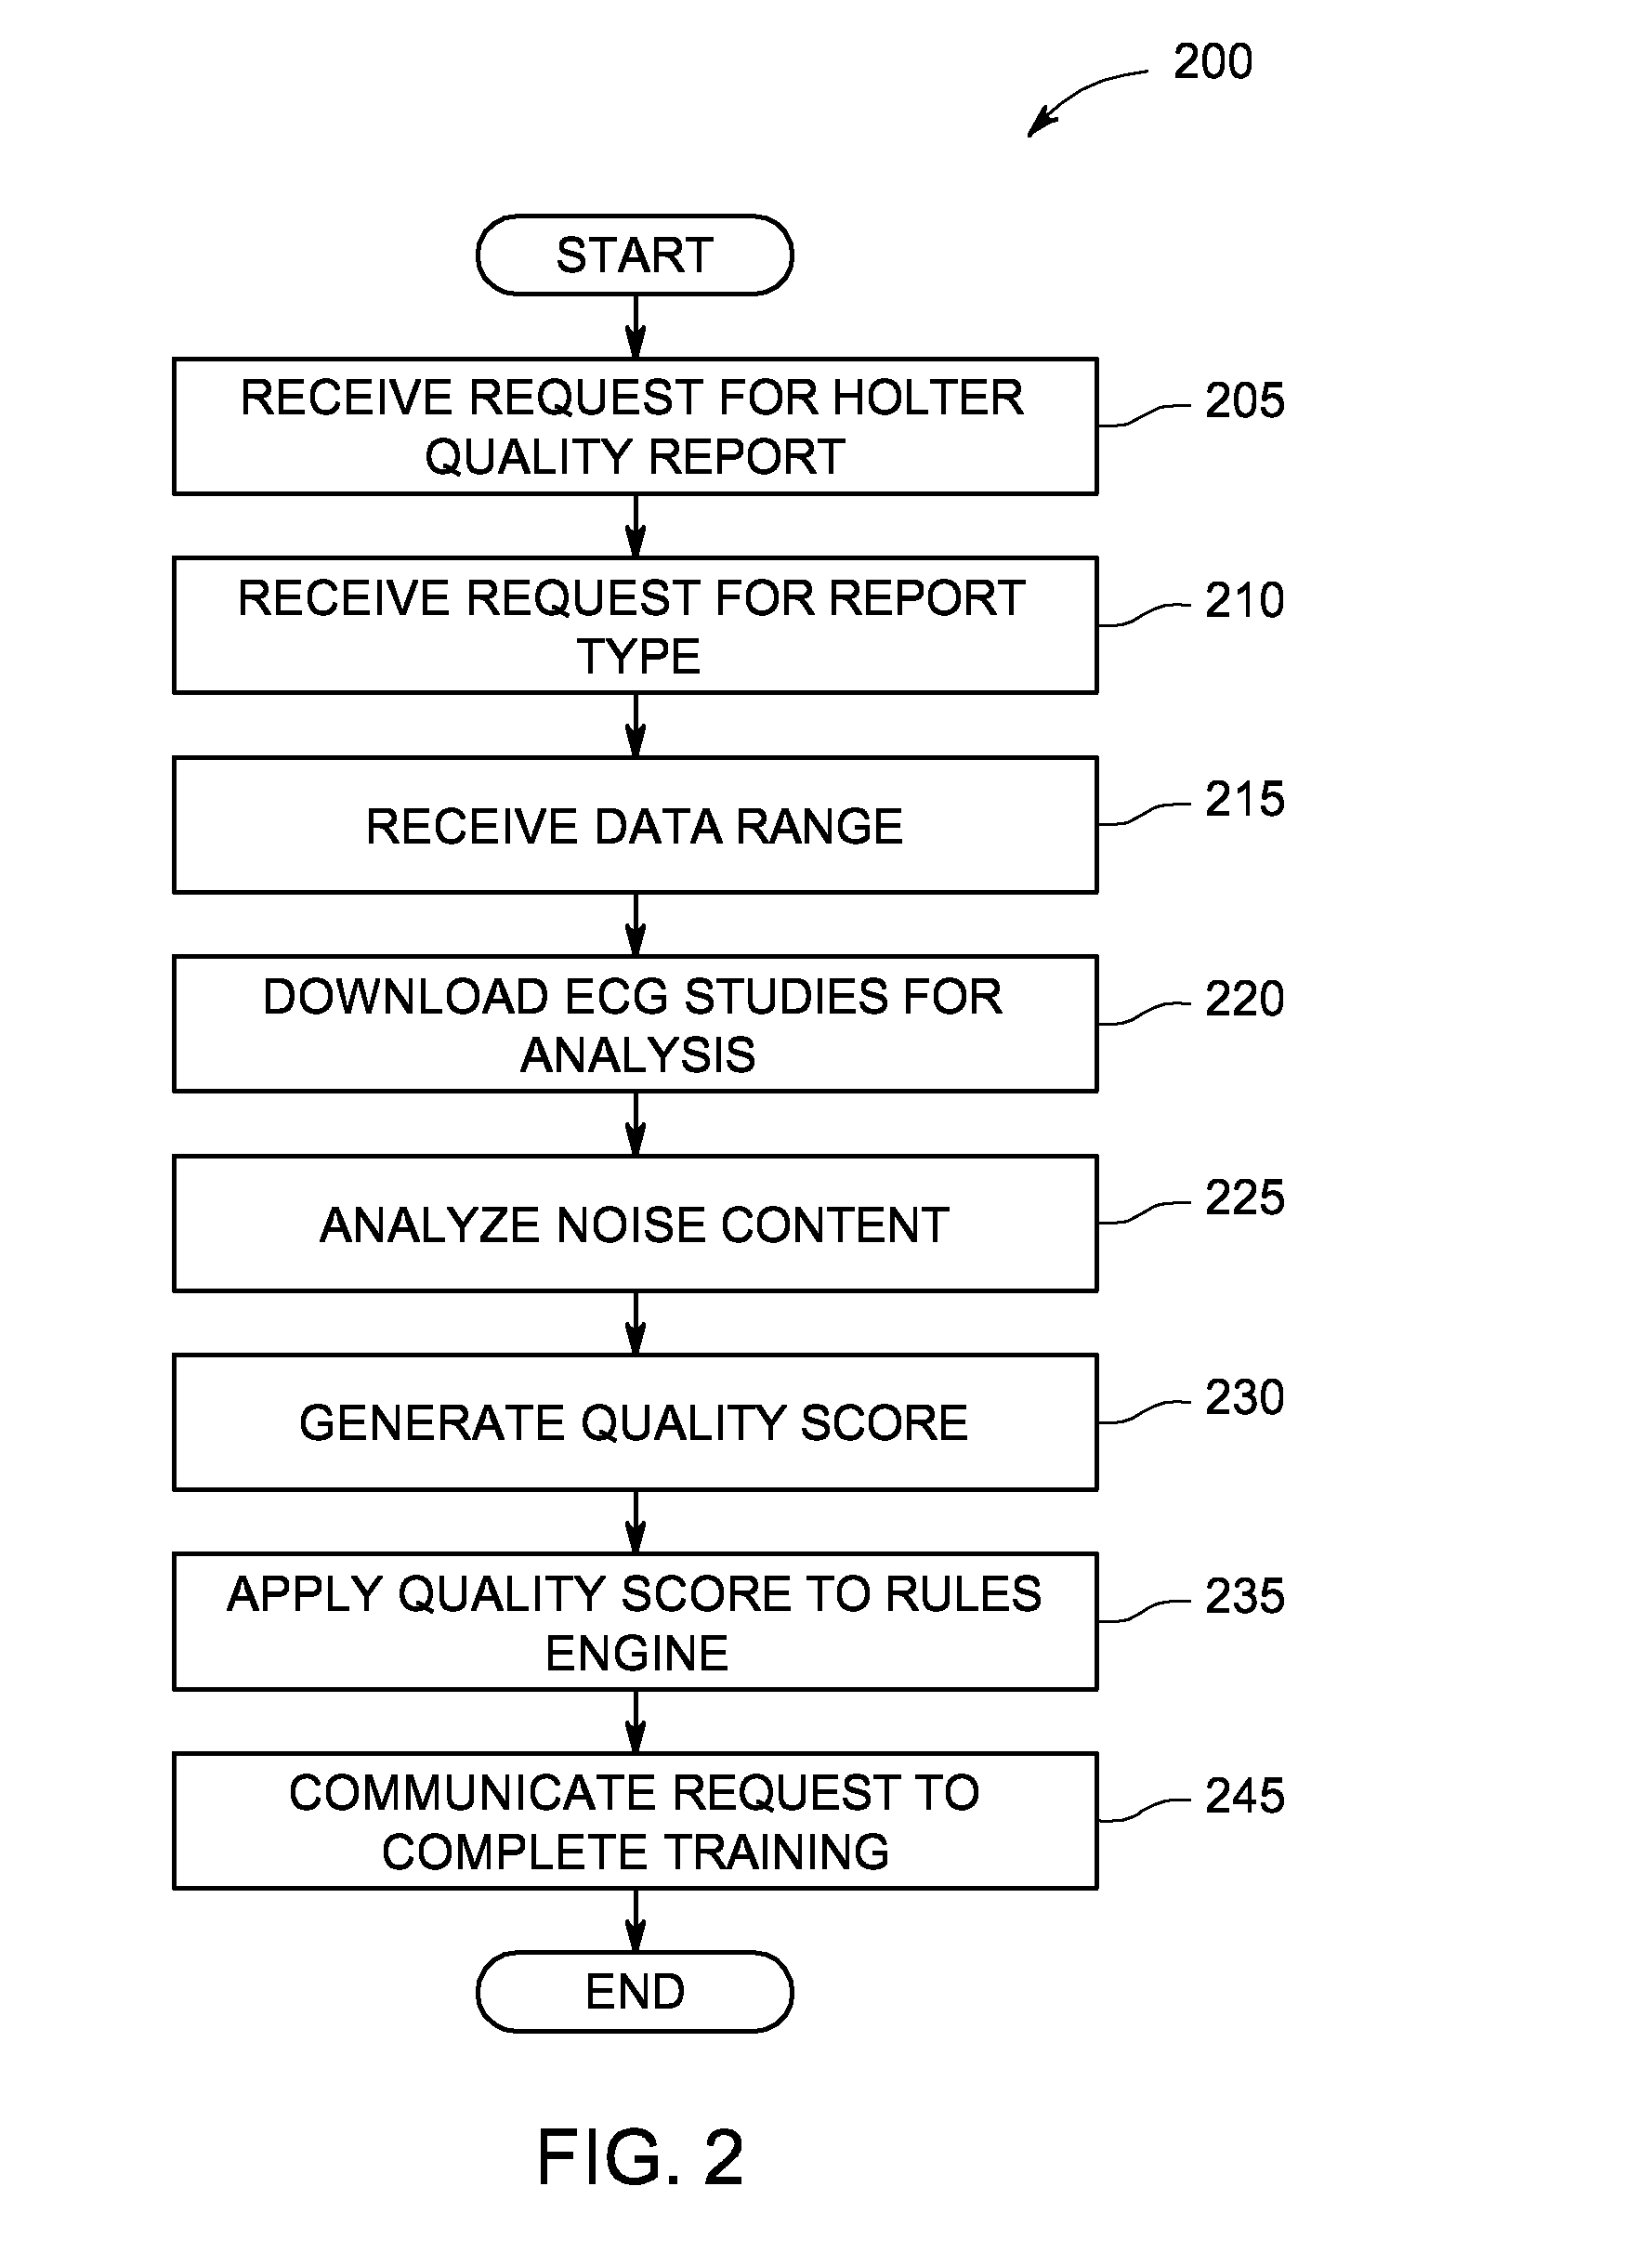 System and method of quality analysis in acquisition of ambulatory electrocardiography device data